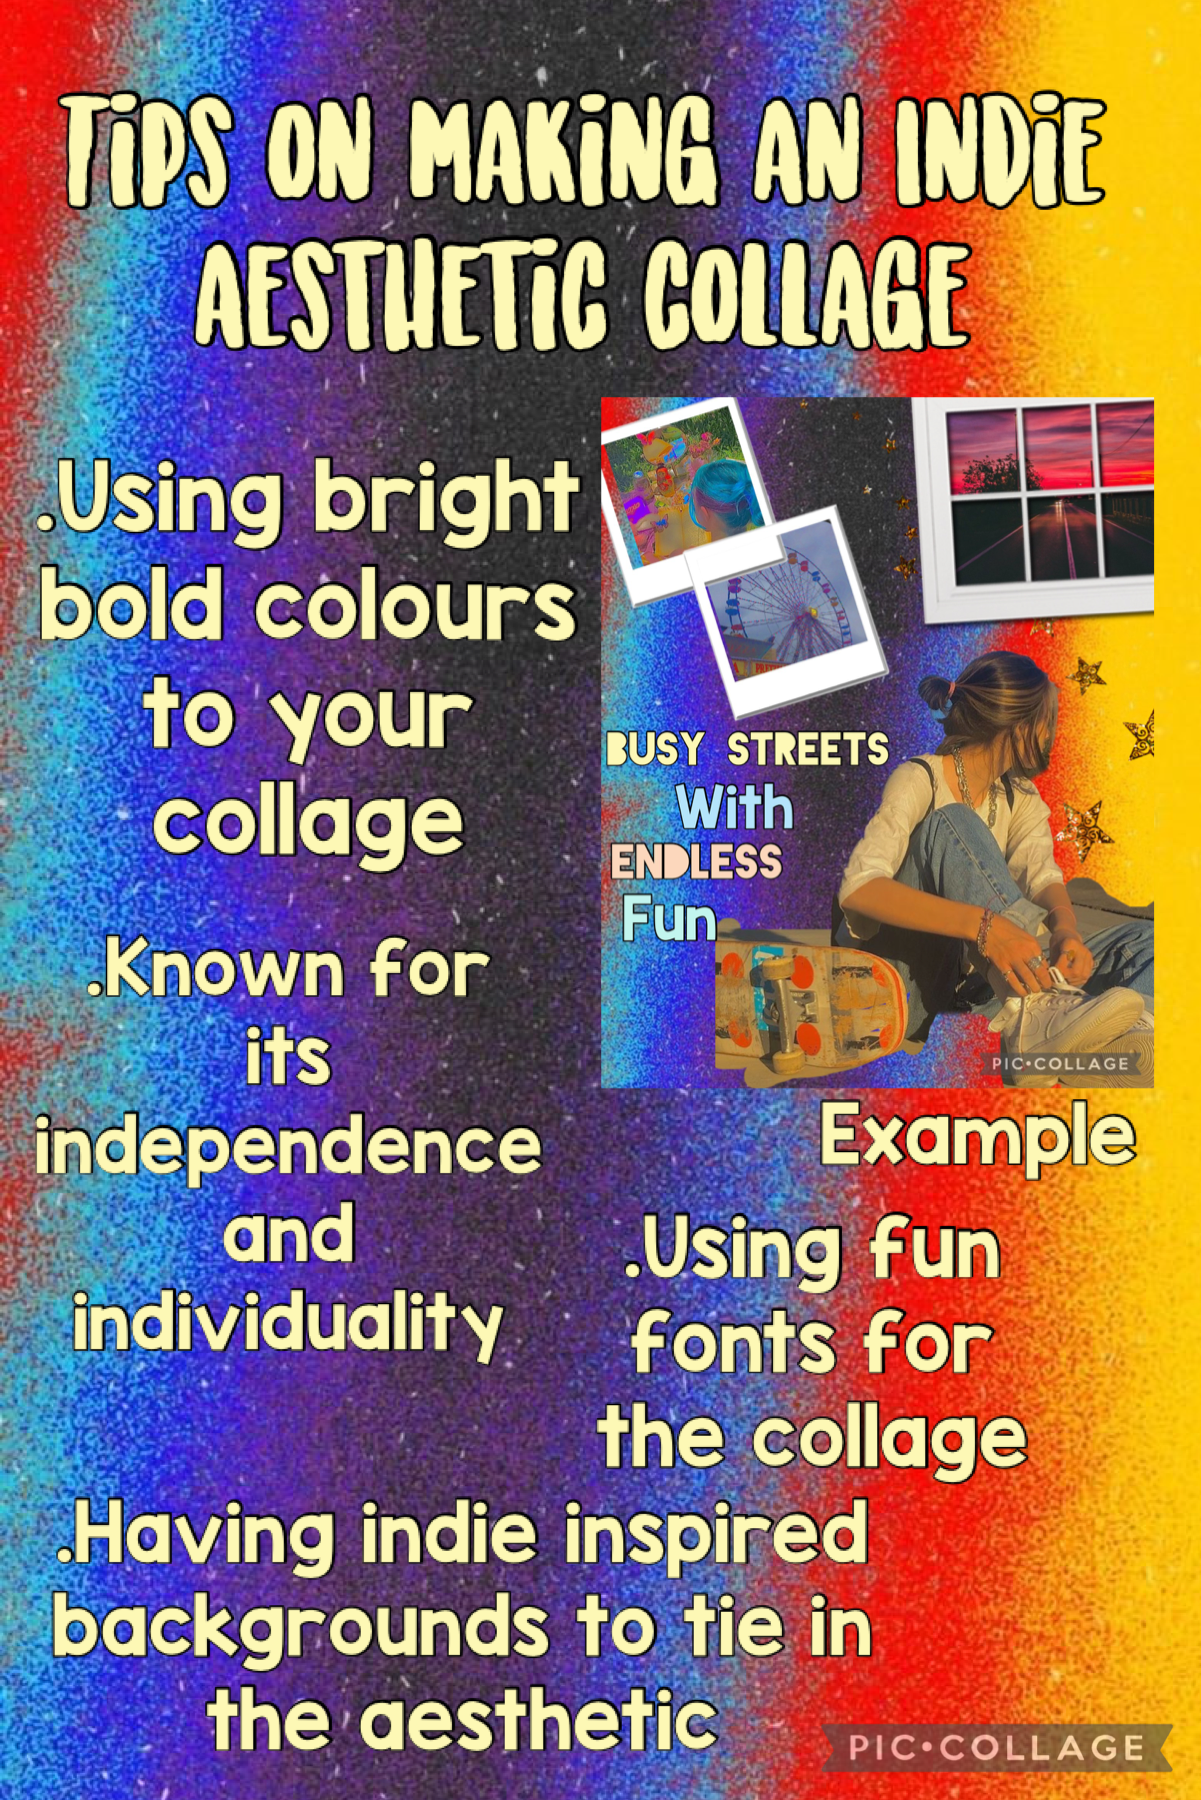 Tips for making Indie aesthetic collage